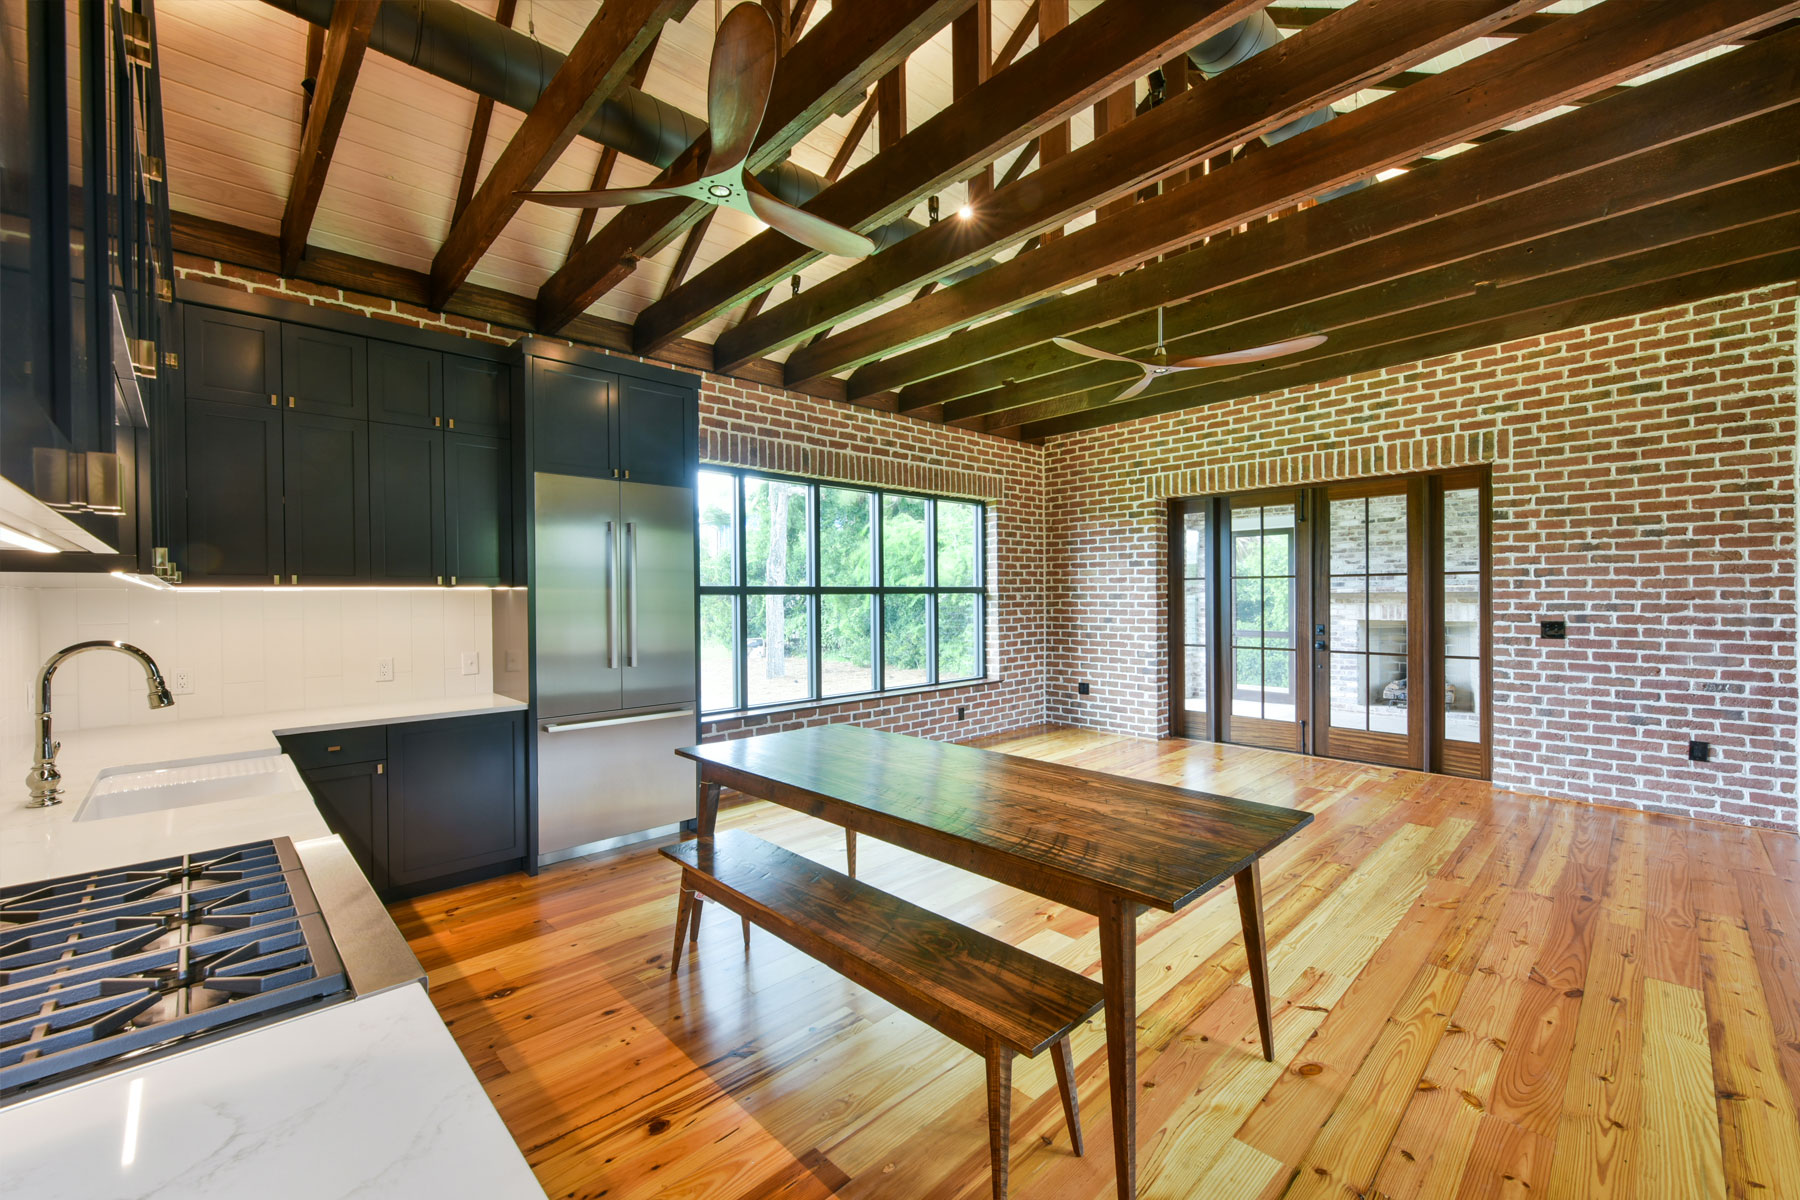 Swallowtail Architecture designs home from converted military building on Sullivan's Island